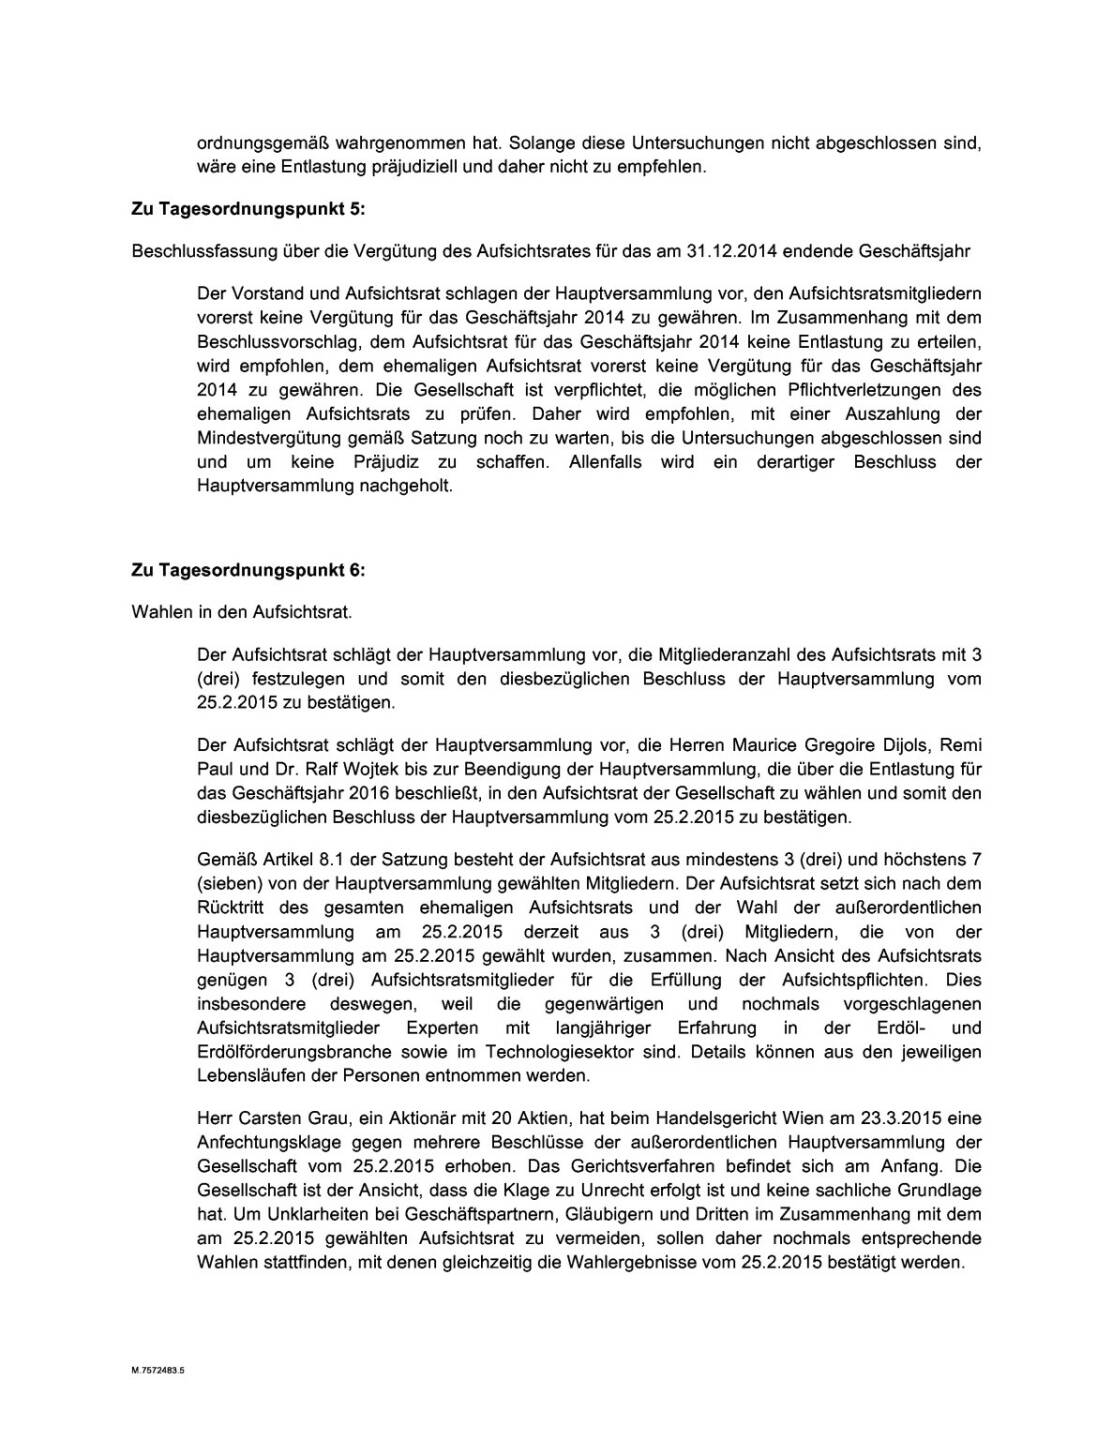 C.A.T. oil  HV Tagesordnung, Seite 2/4, komplettes Dokument unter http://boerse-social.com/static/uploads/file_176_cat_oil_hv_tagesordnung.pdf